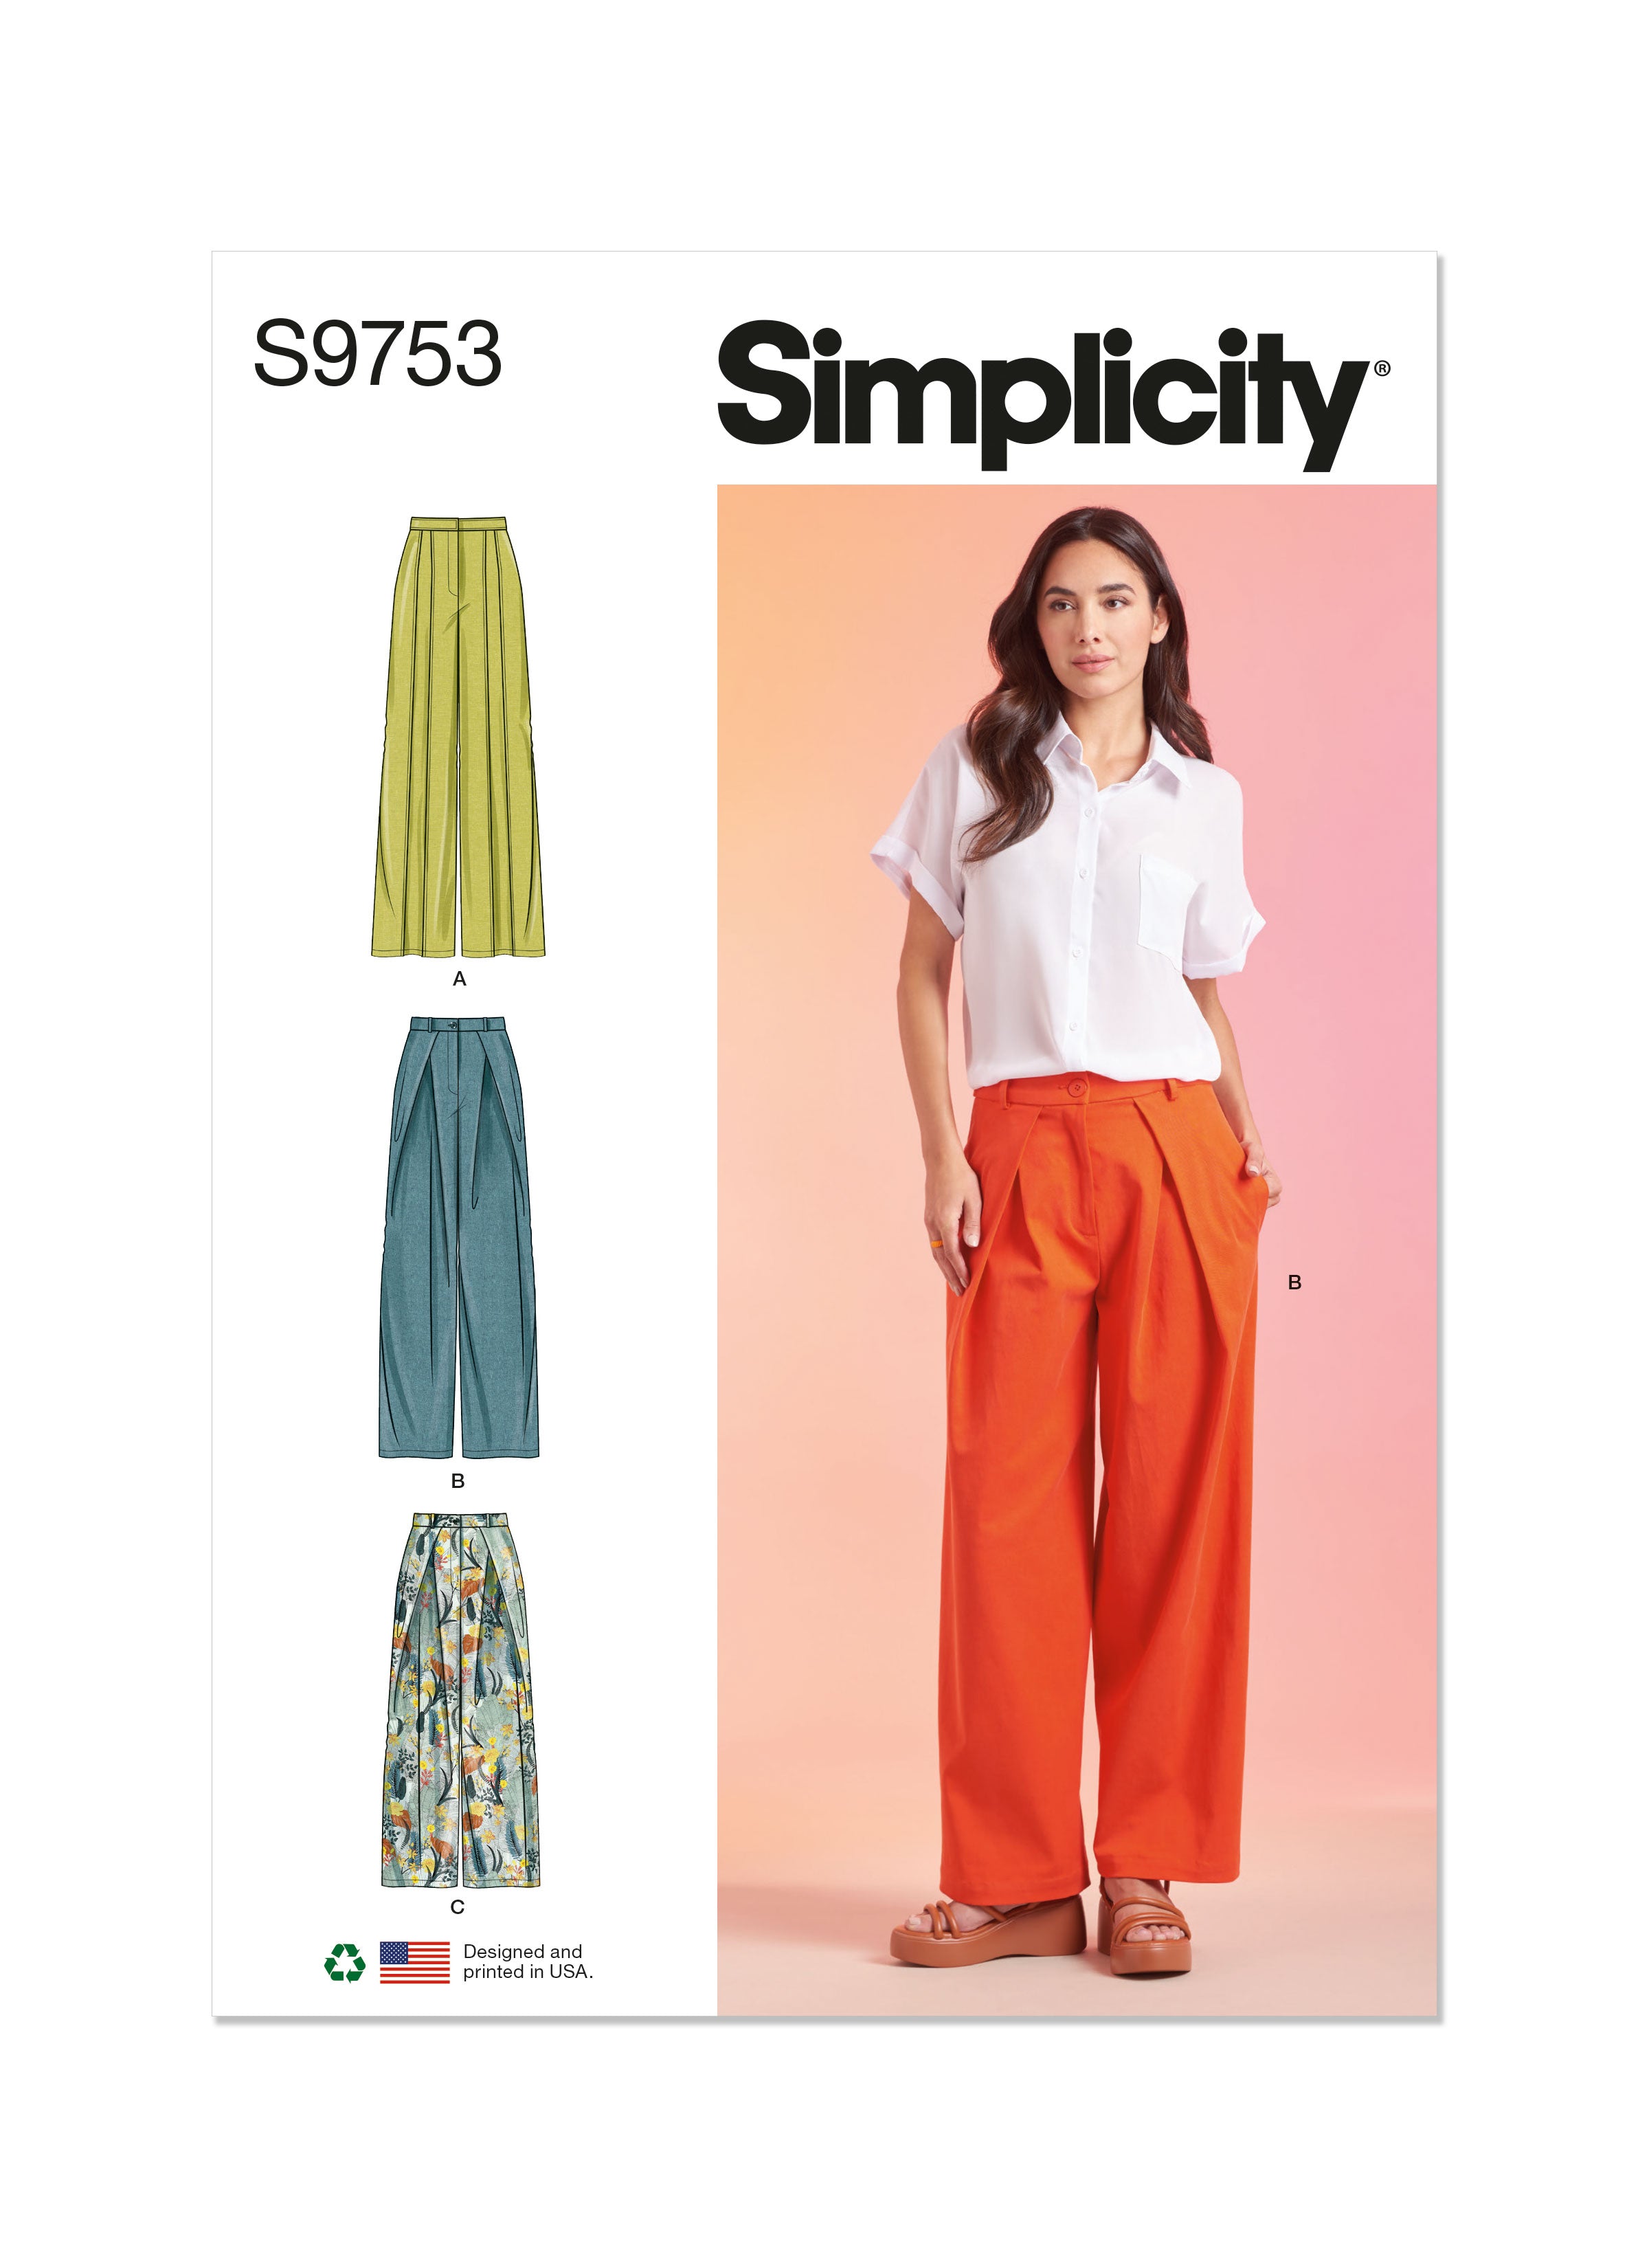 Simplicity 9753 sewing pattern Misses' Pants from Jaycotts Sewing Supplies